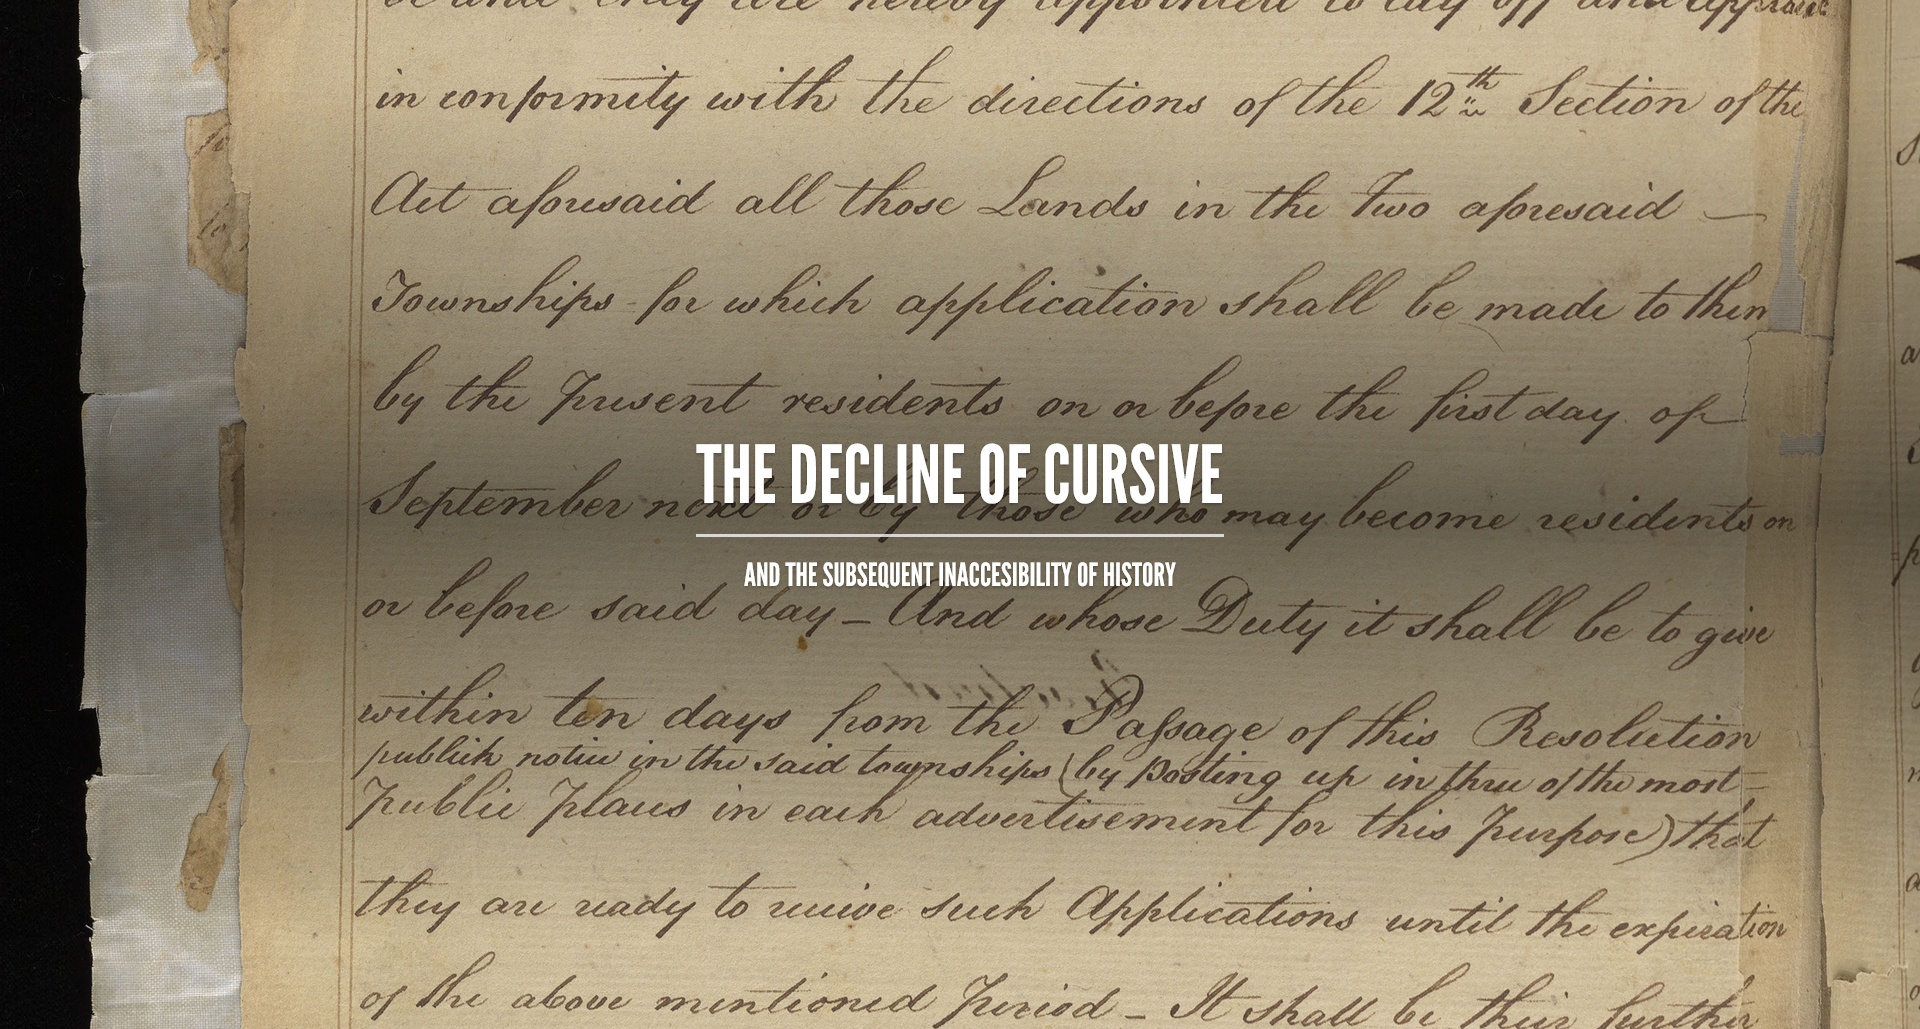 Image shows the title view of the digital exhibit: The Decline of Cursive and the Subsequent Inaccessibility of History by Judinya Thwaites-Brevik